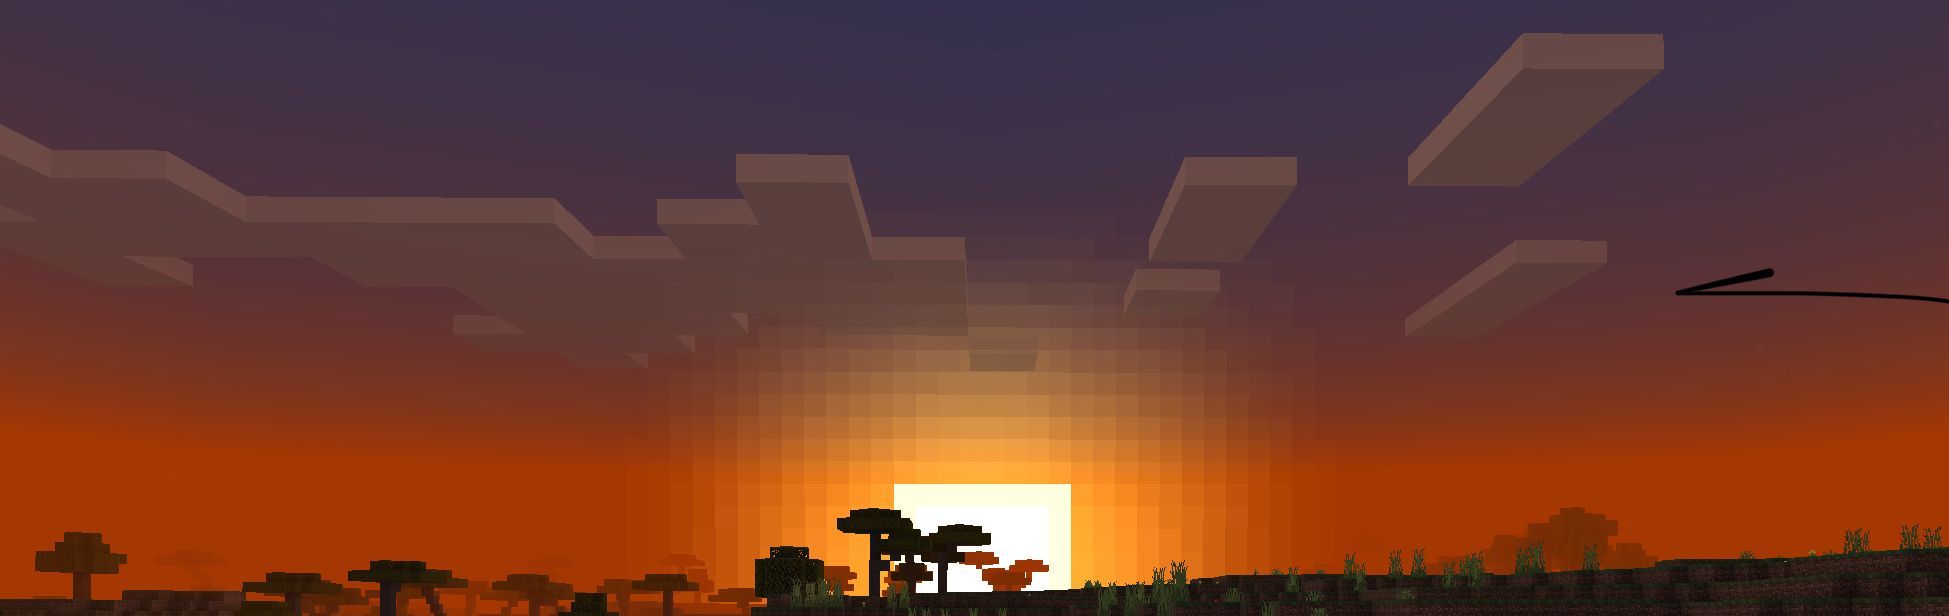 aesthetic picture from minecraft you can use it for wallpaper